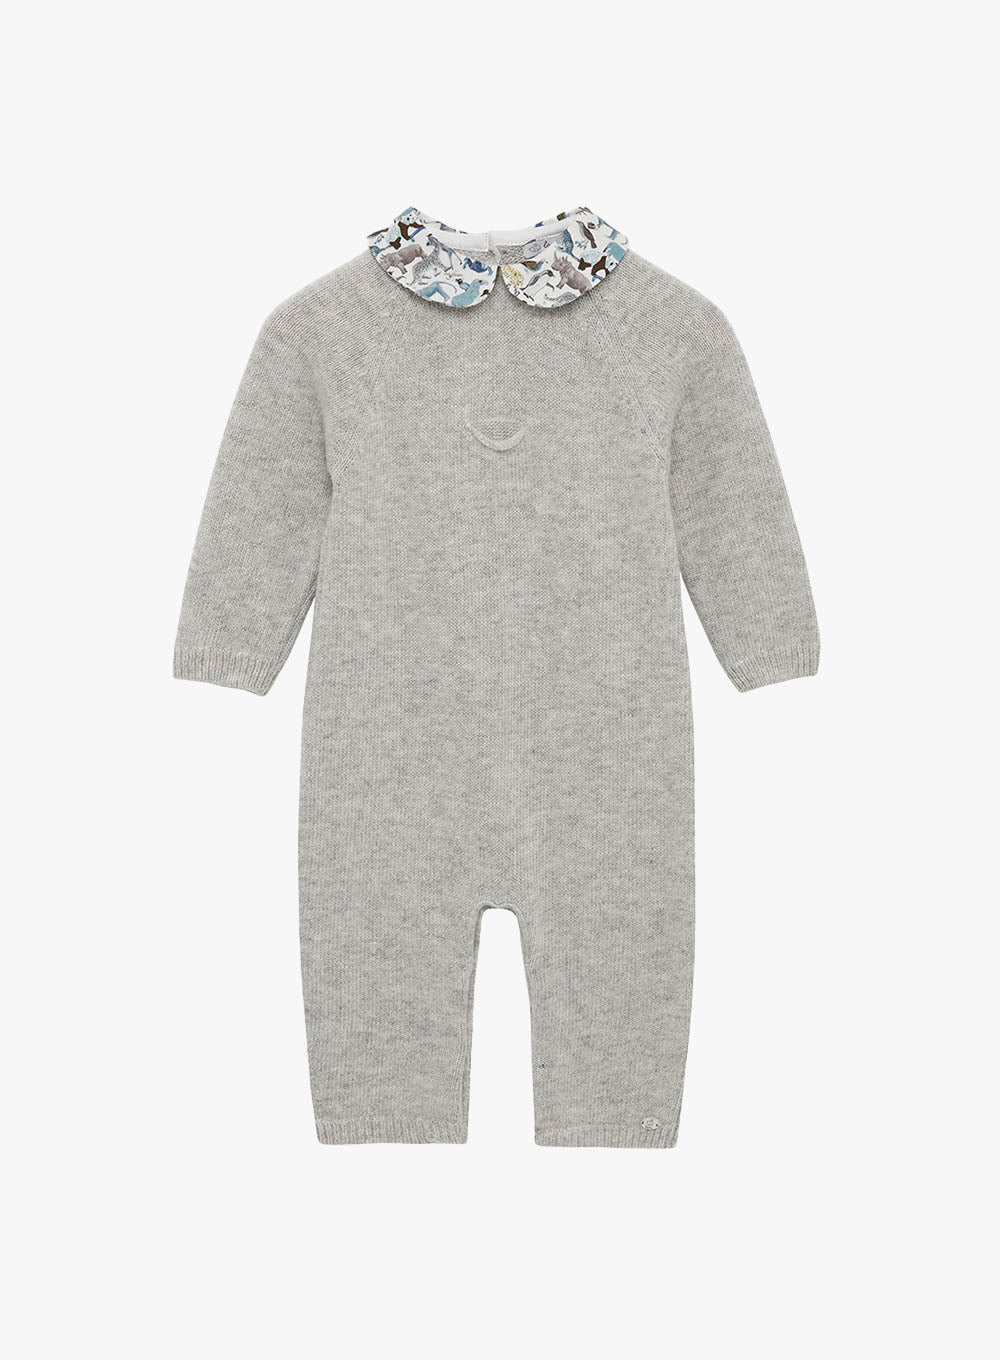 Little Knitted Onesie in Zoo Print